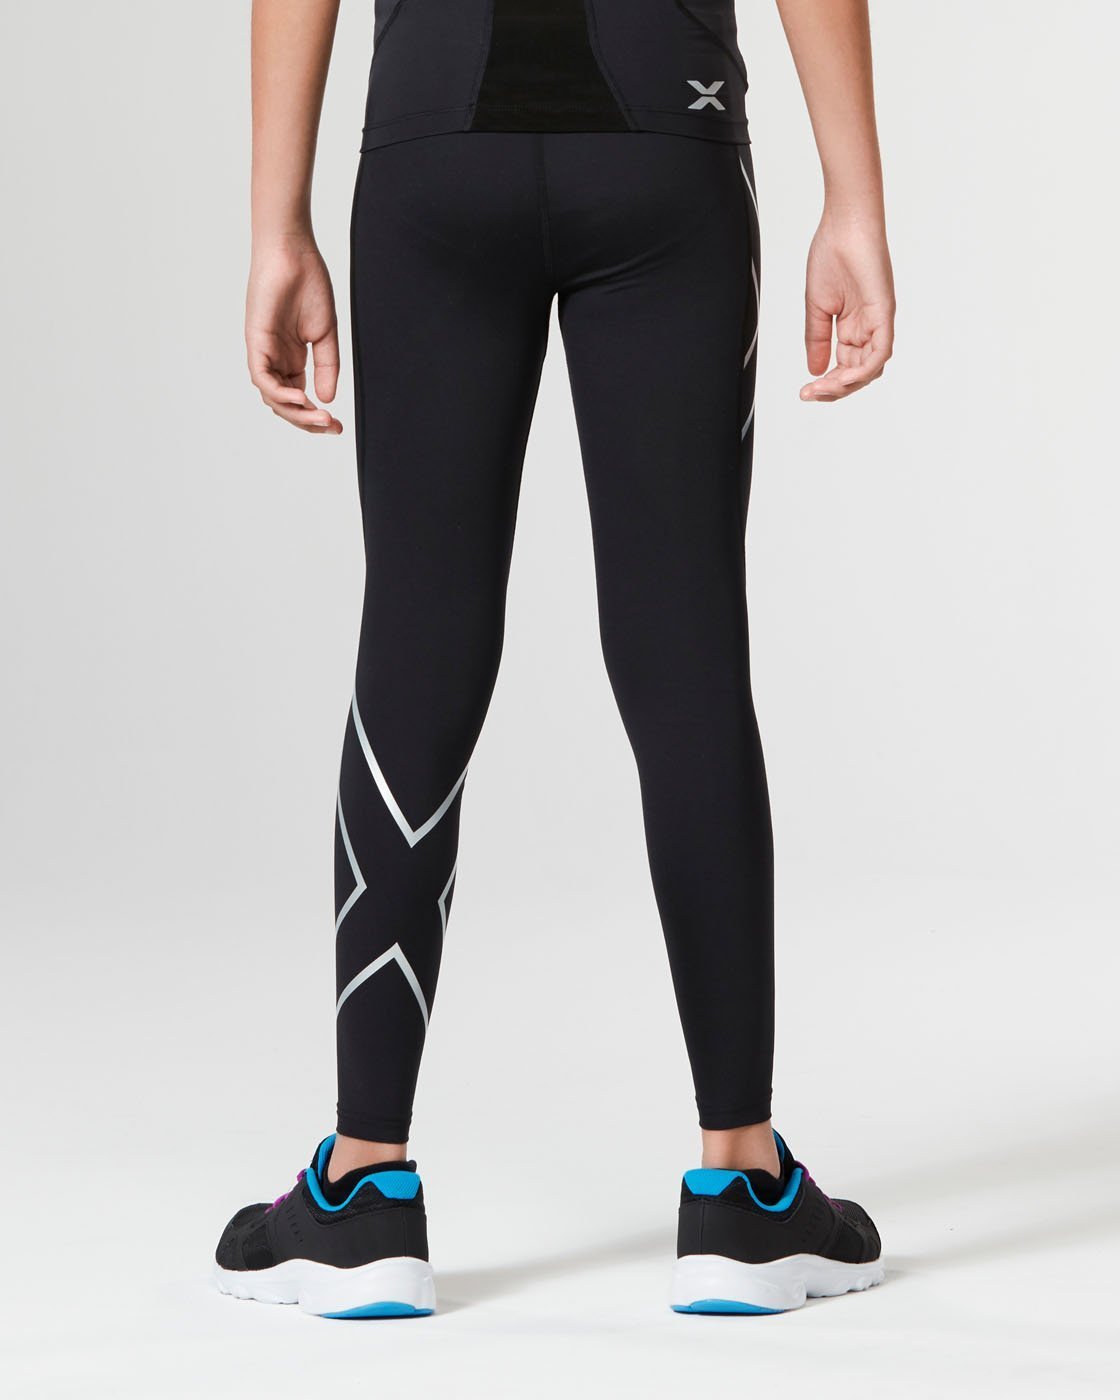 2XU South Africa - Girls' Core Compression Tights - Black/Silver